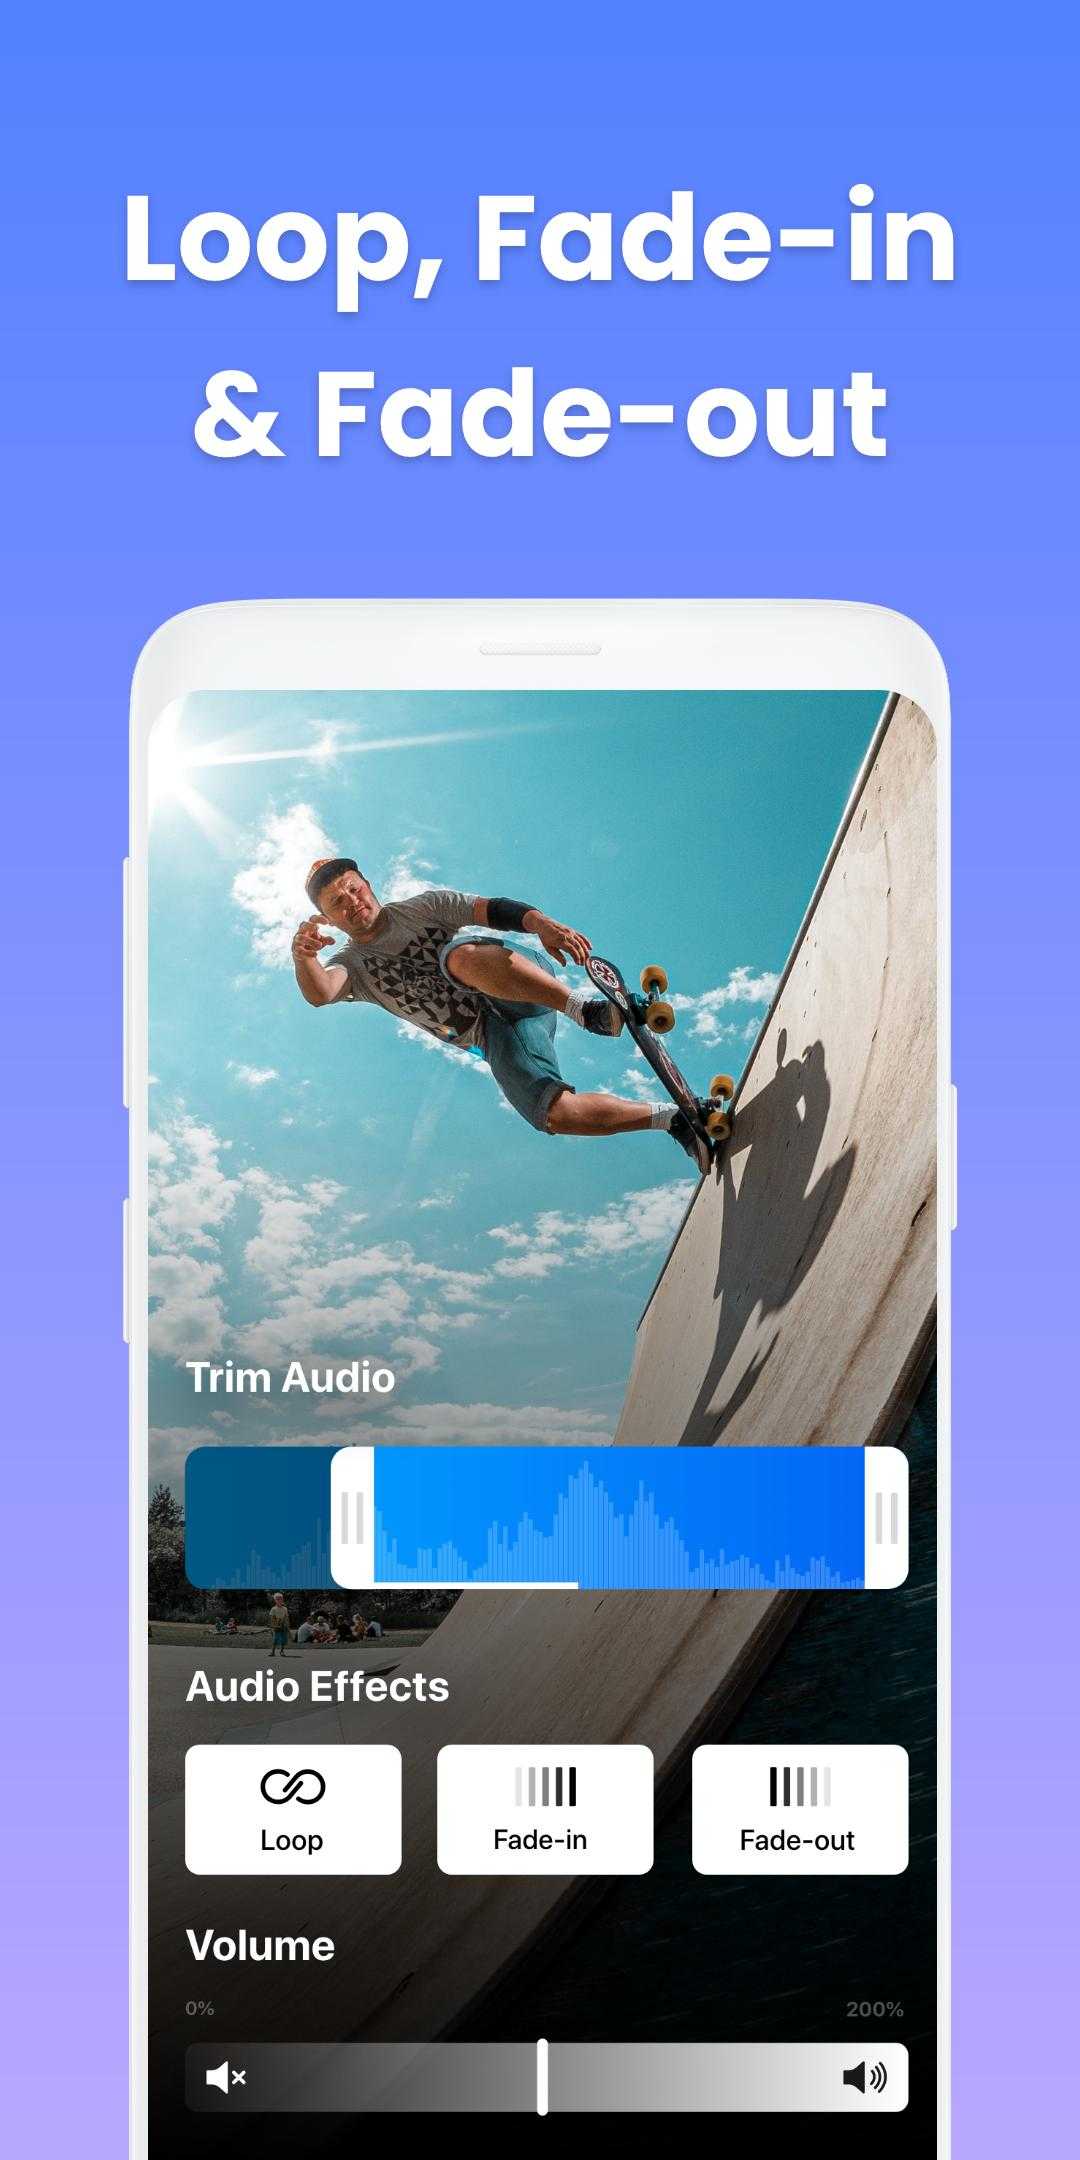 Add music to video – background music for videos v3.4 (Unlocked) APK